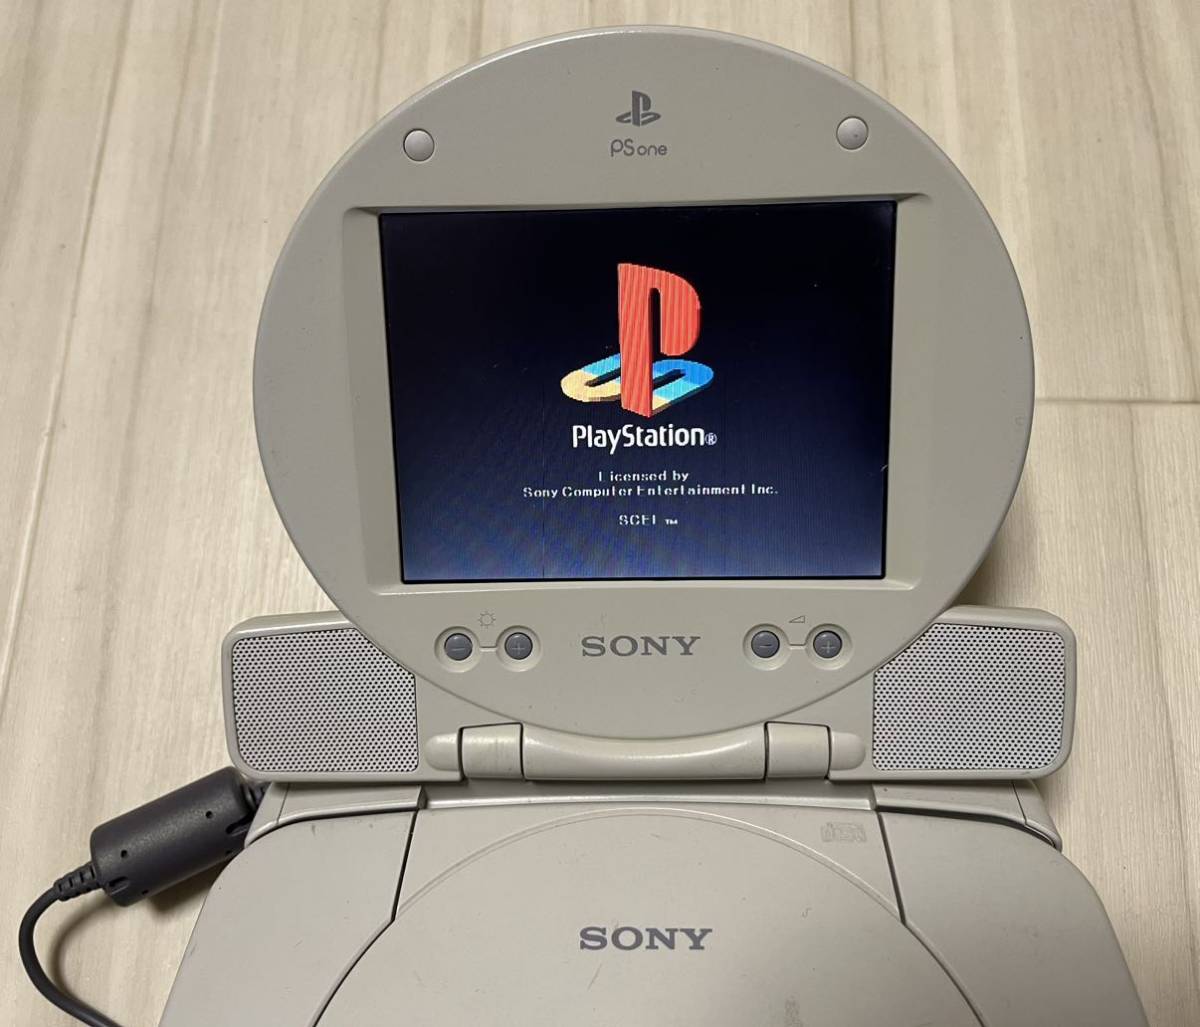 SONY PlayStation PSone ソニー プレイステーション PS One COMBO コンボ　液晶モニター　オマケコントローラ付き